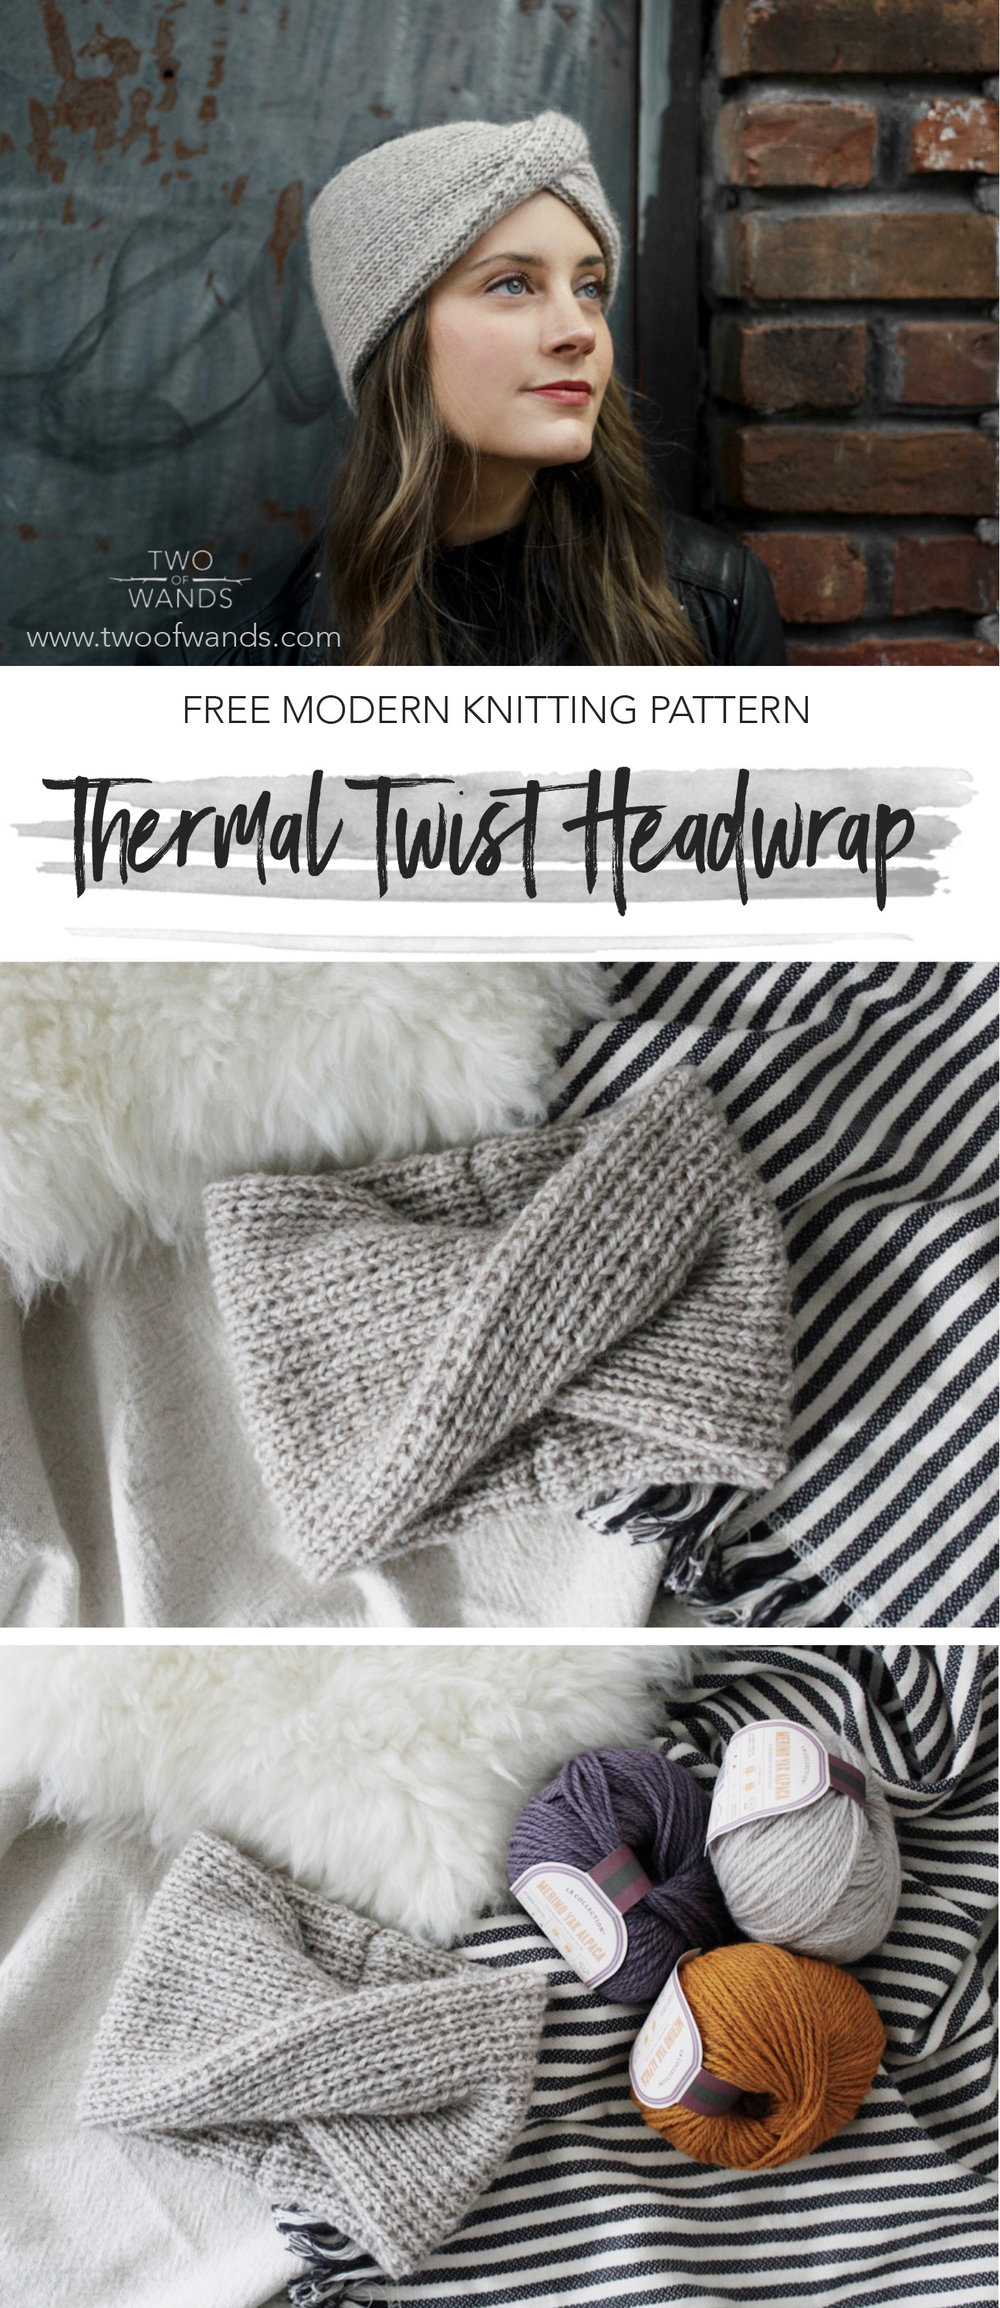 Thermal Twist Headwrap pattern by Two of Wands